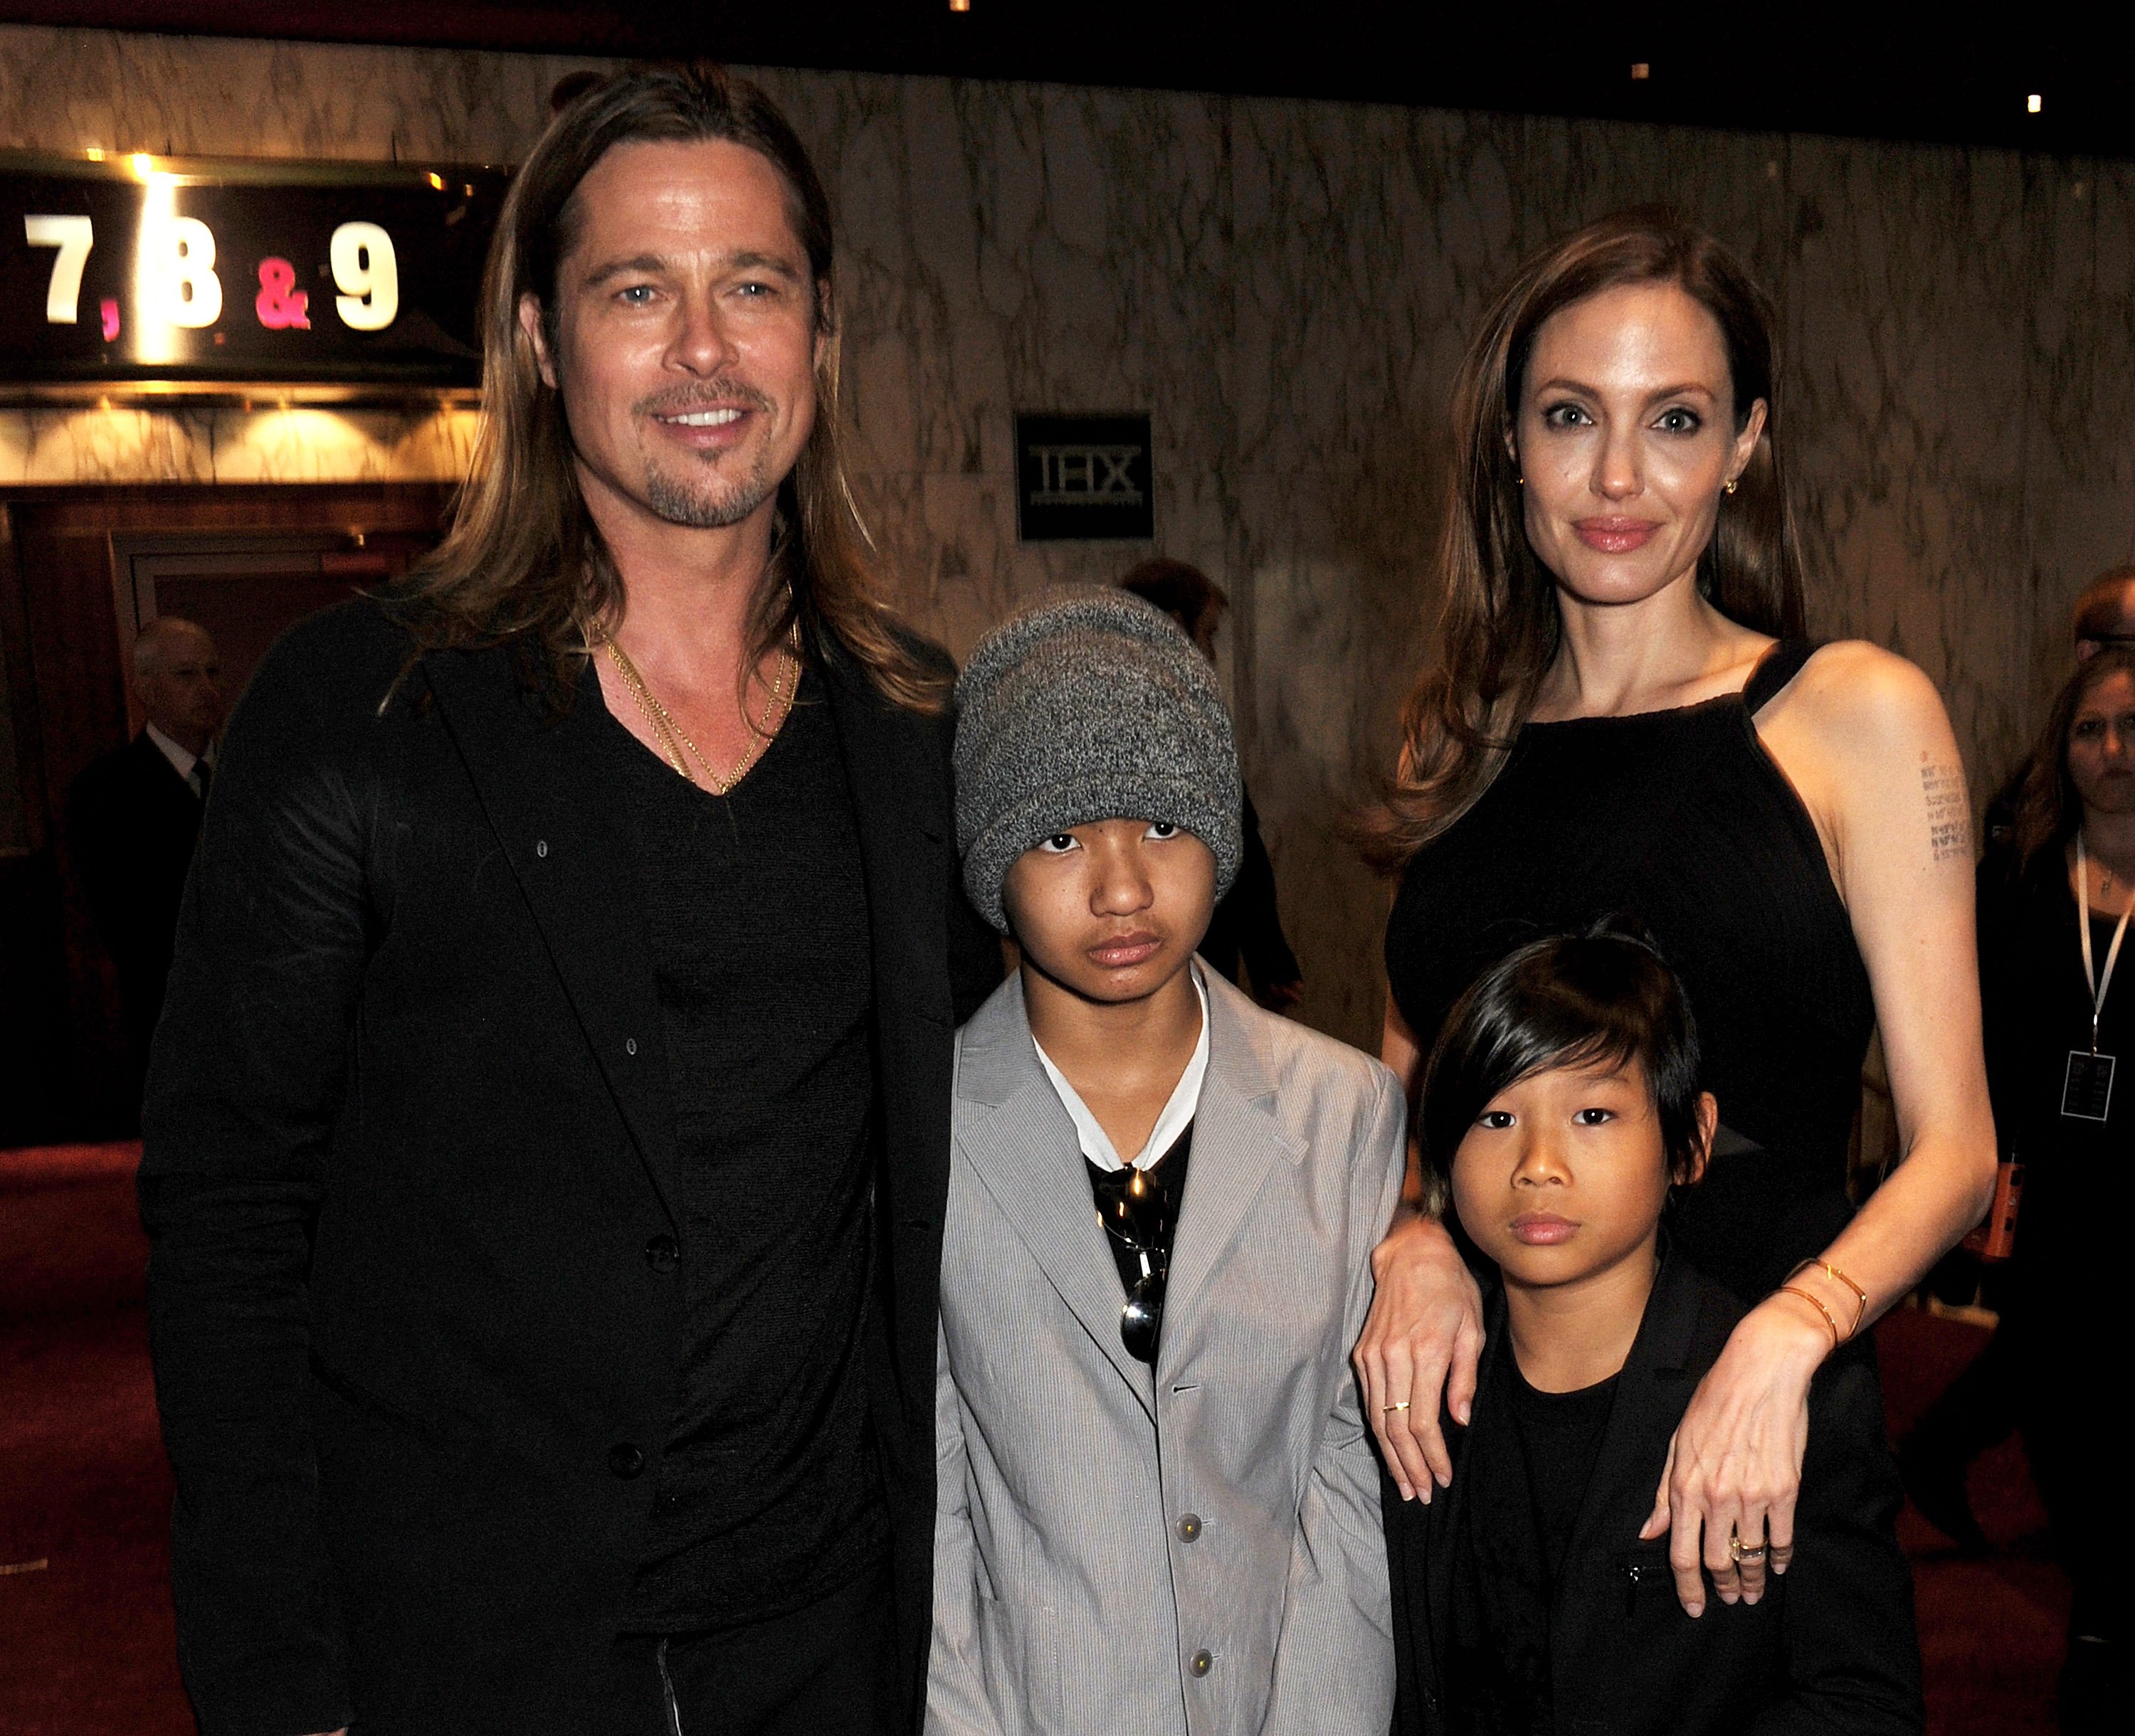 Brad Pitt, Maddox Jolie-Pitt, Pax Jolie-Pitt and Angelina Jolie attend the World Premiere of 'World War Z' at The Empire Cinema Leicester Square on June 2, 2013 in London, England | Source: Getty Images